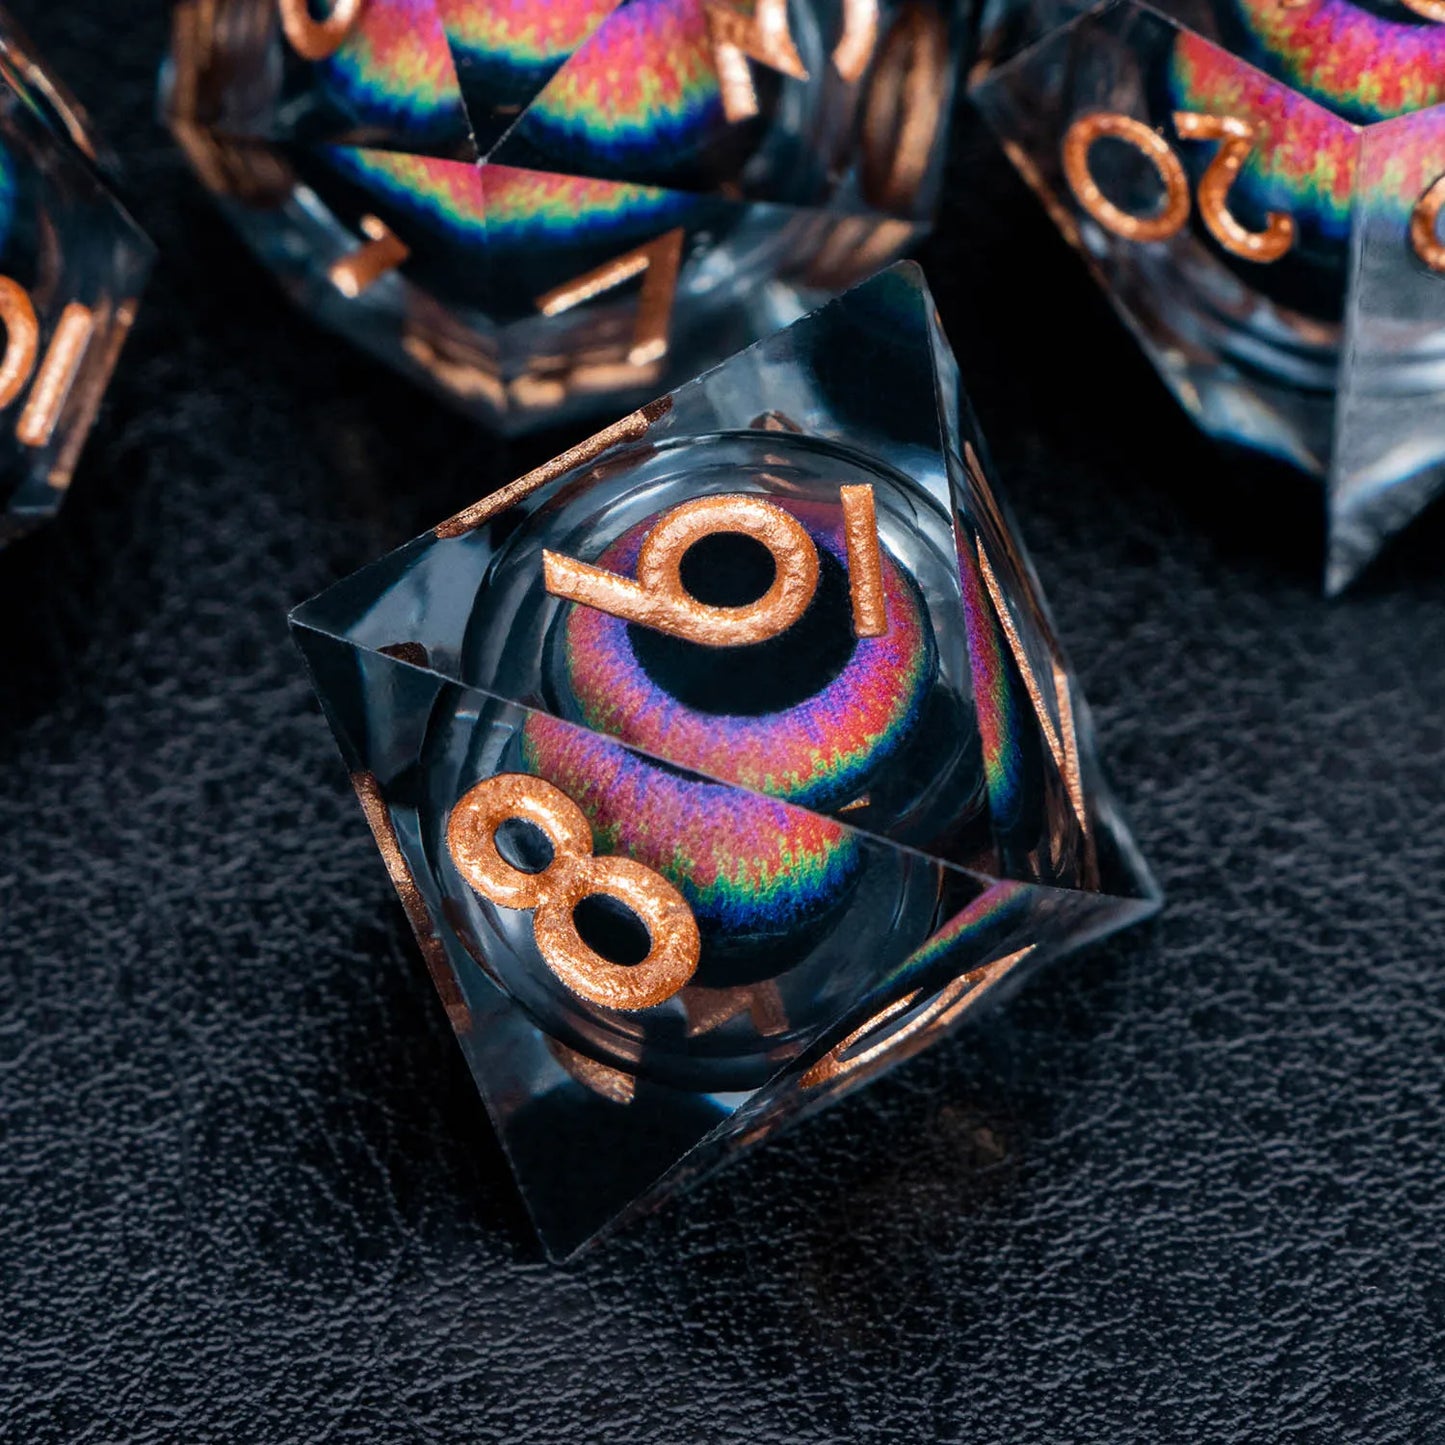 D and D Beholder's Liquid Flow Core Eye Resin Dice Set | Dnd Dungeon and Dragon Pathfinder Role Playing Game Dice | D20 D&D Dice